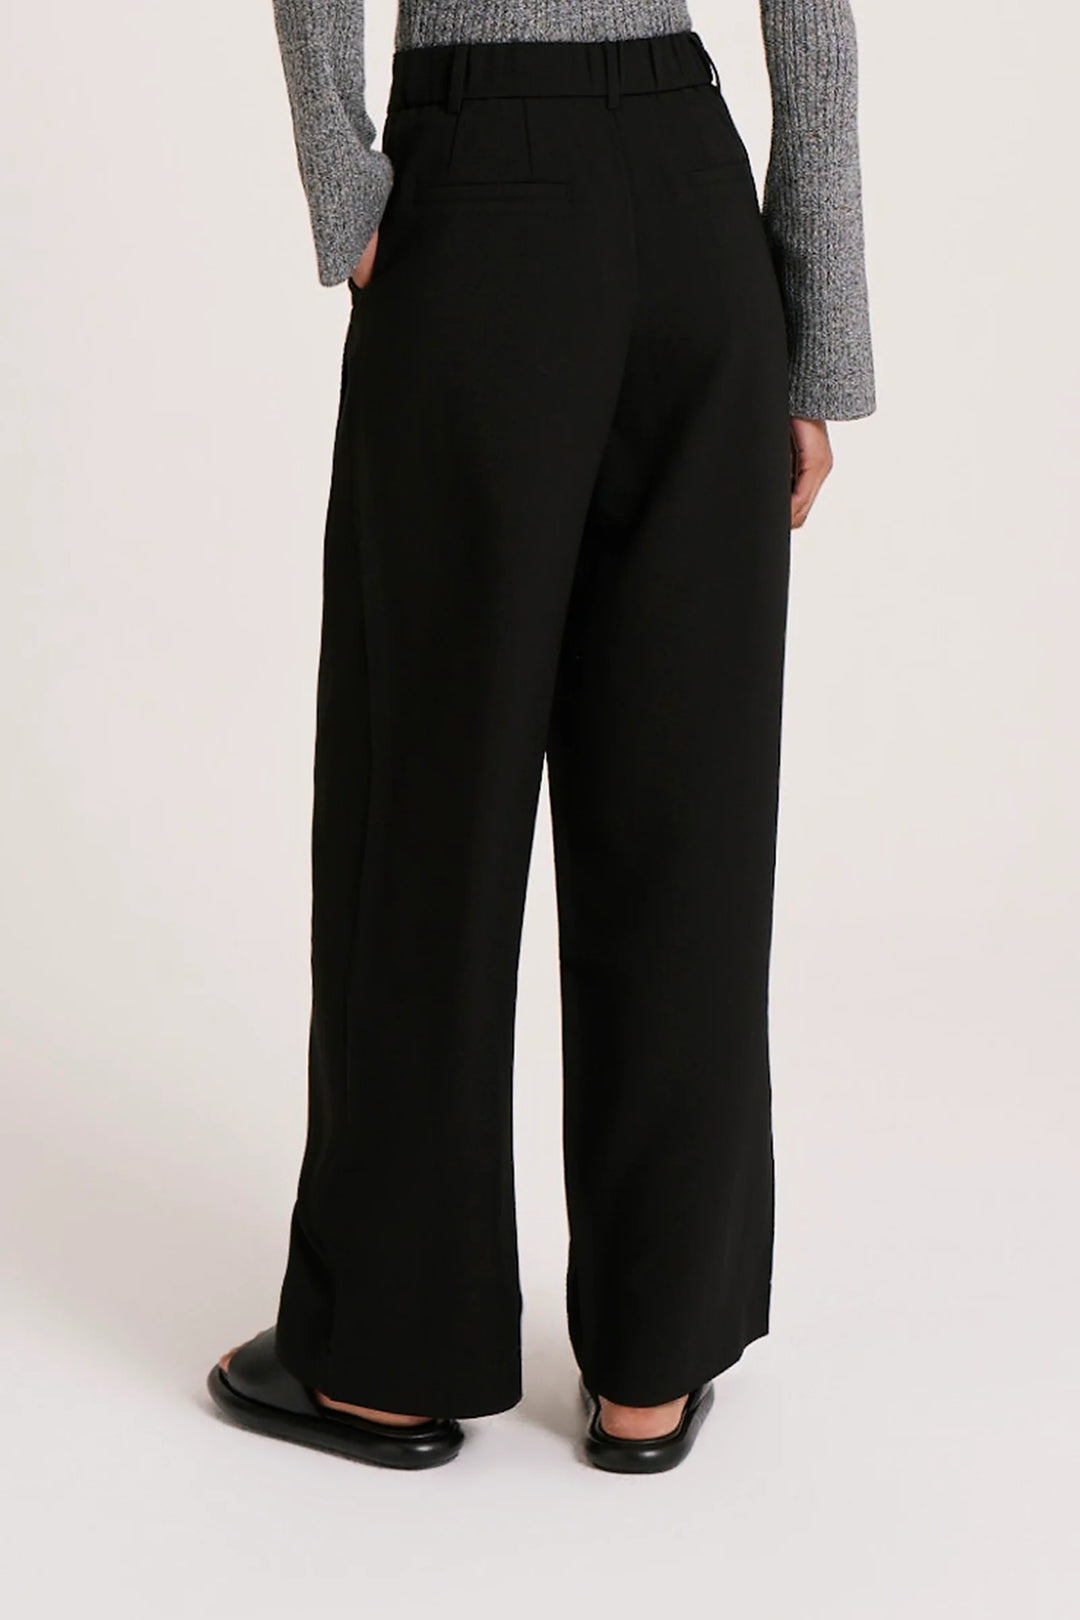 Nude Lucy Manon Tailored Pant - Black